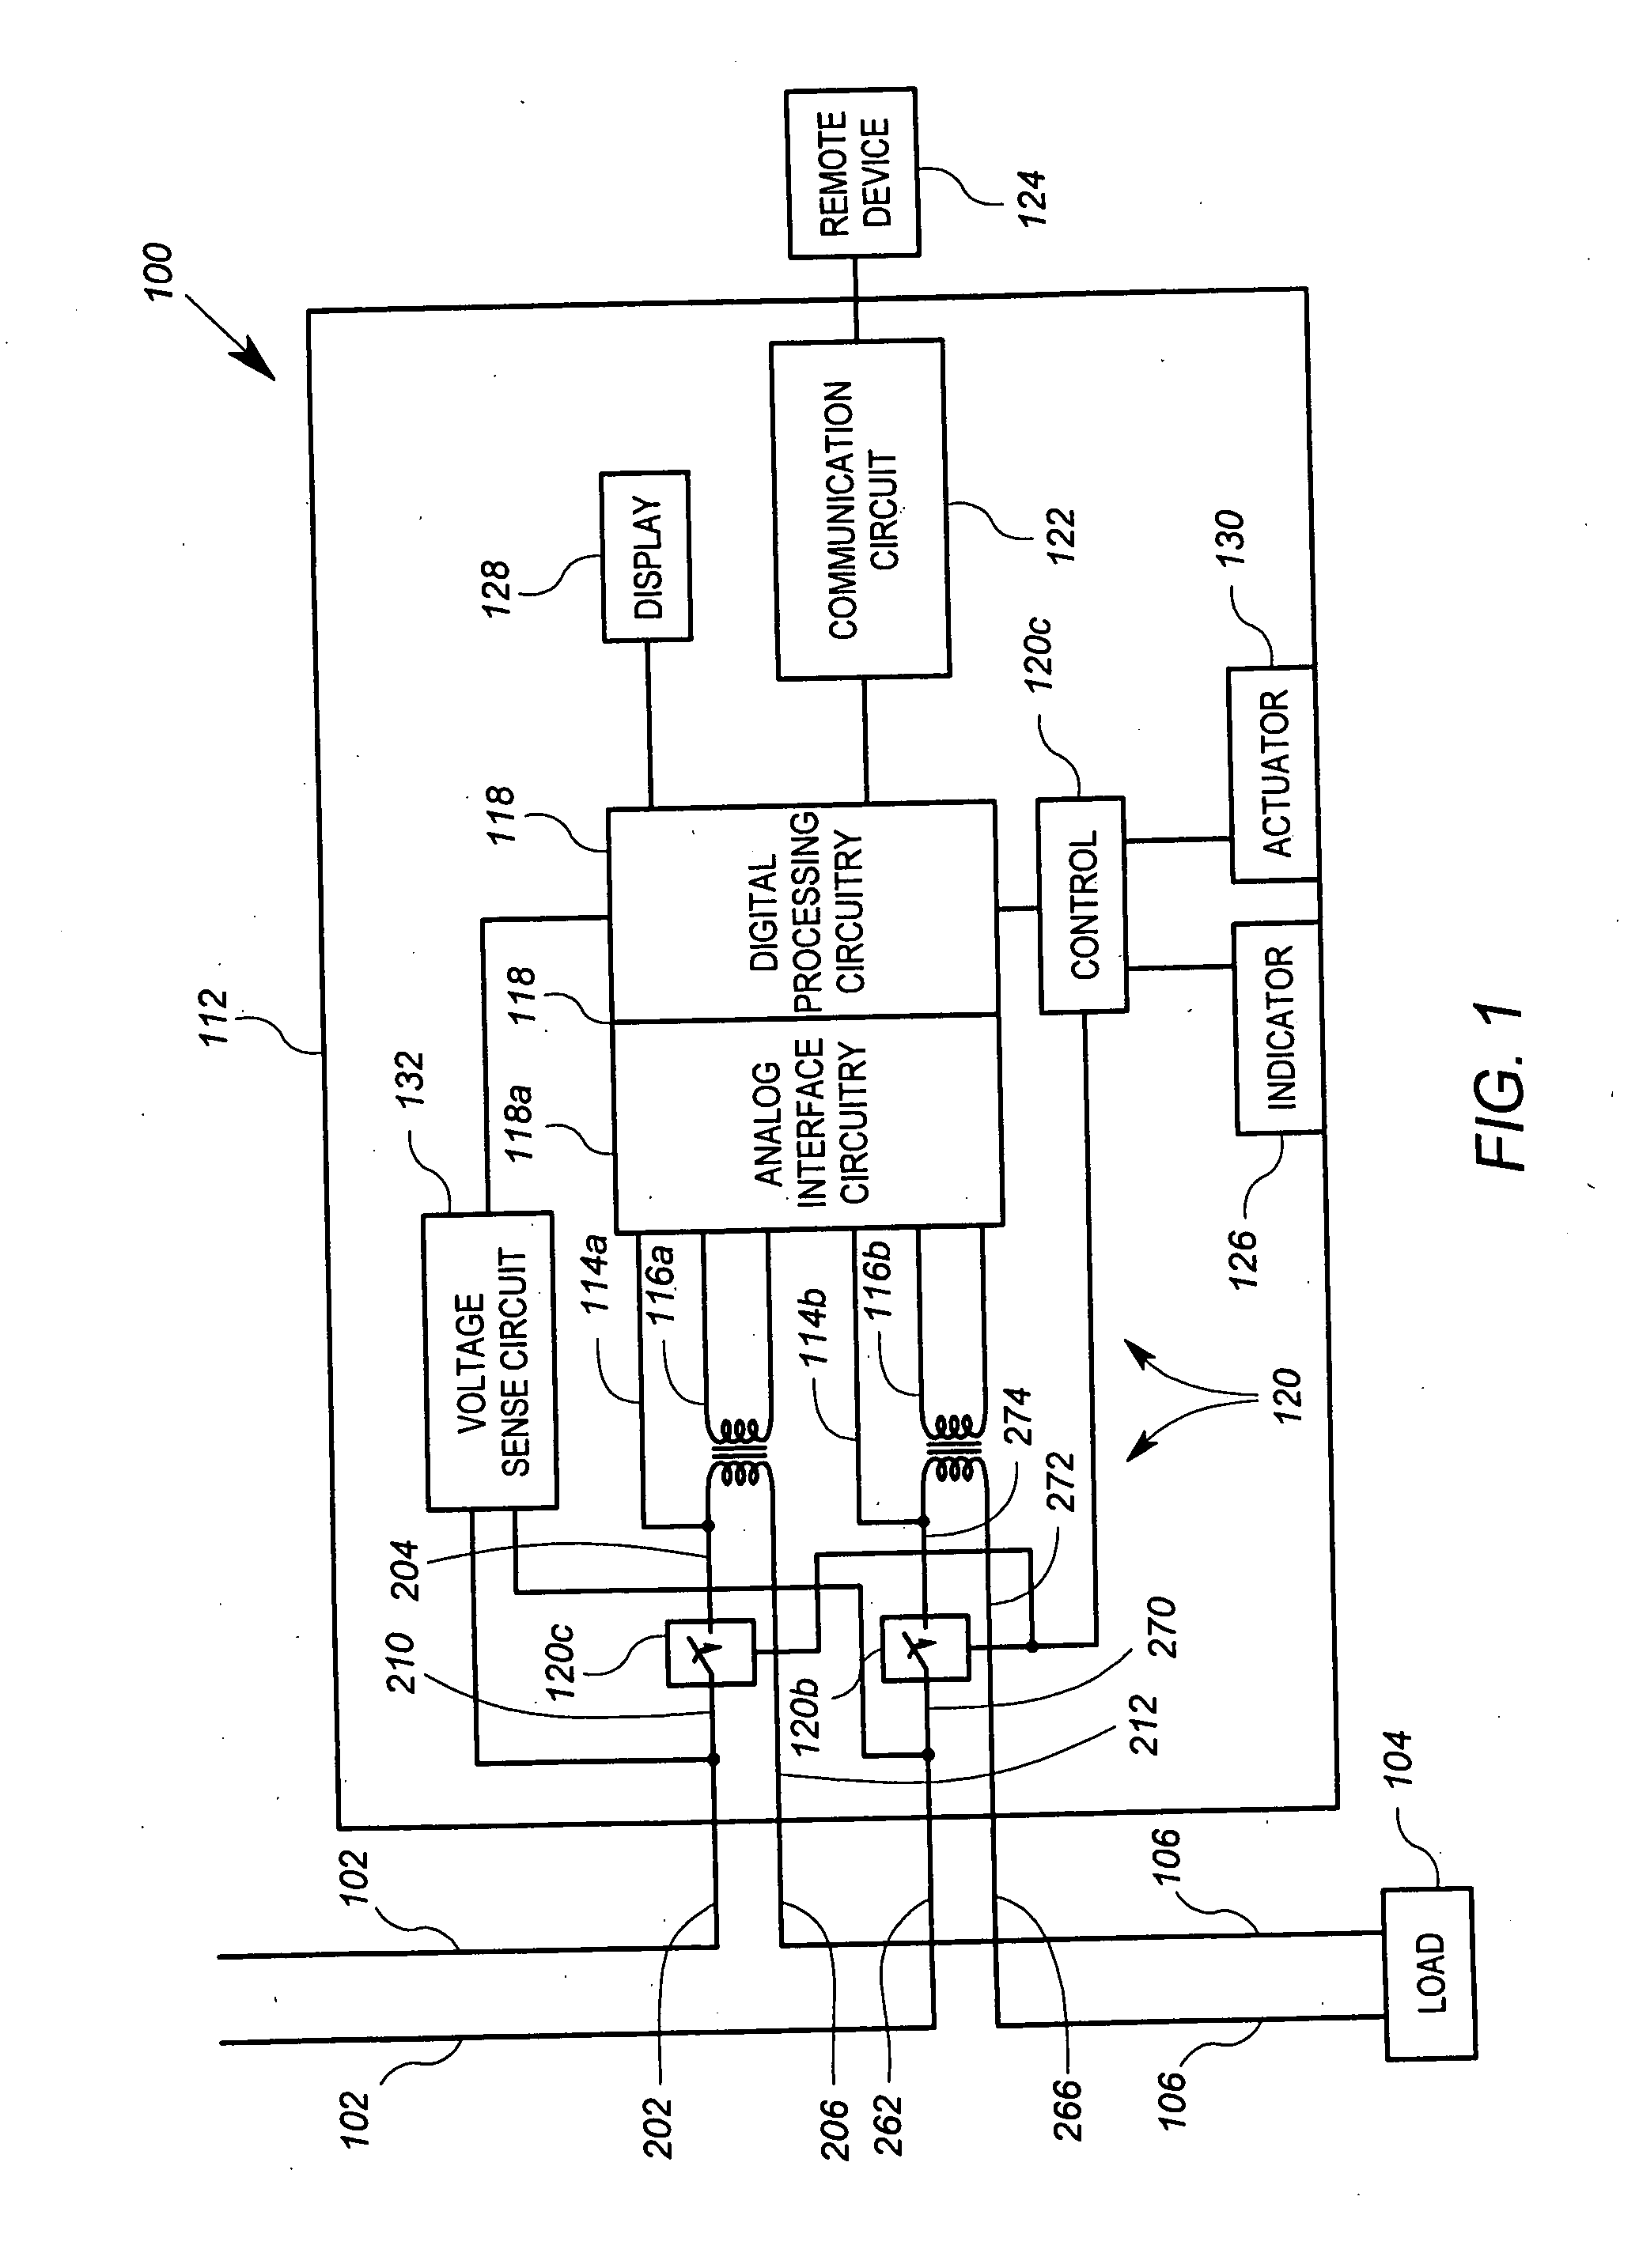 Apparatus and method for metering contact integrity